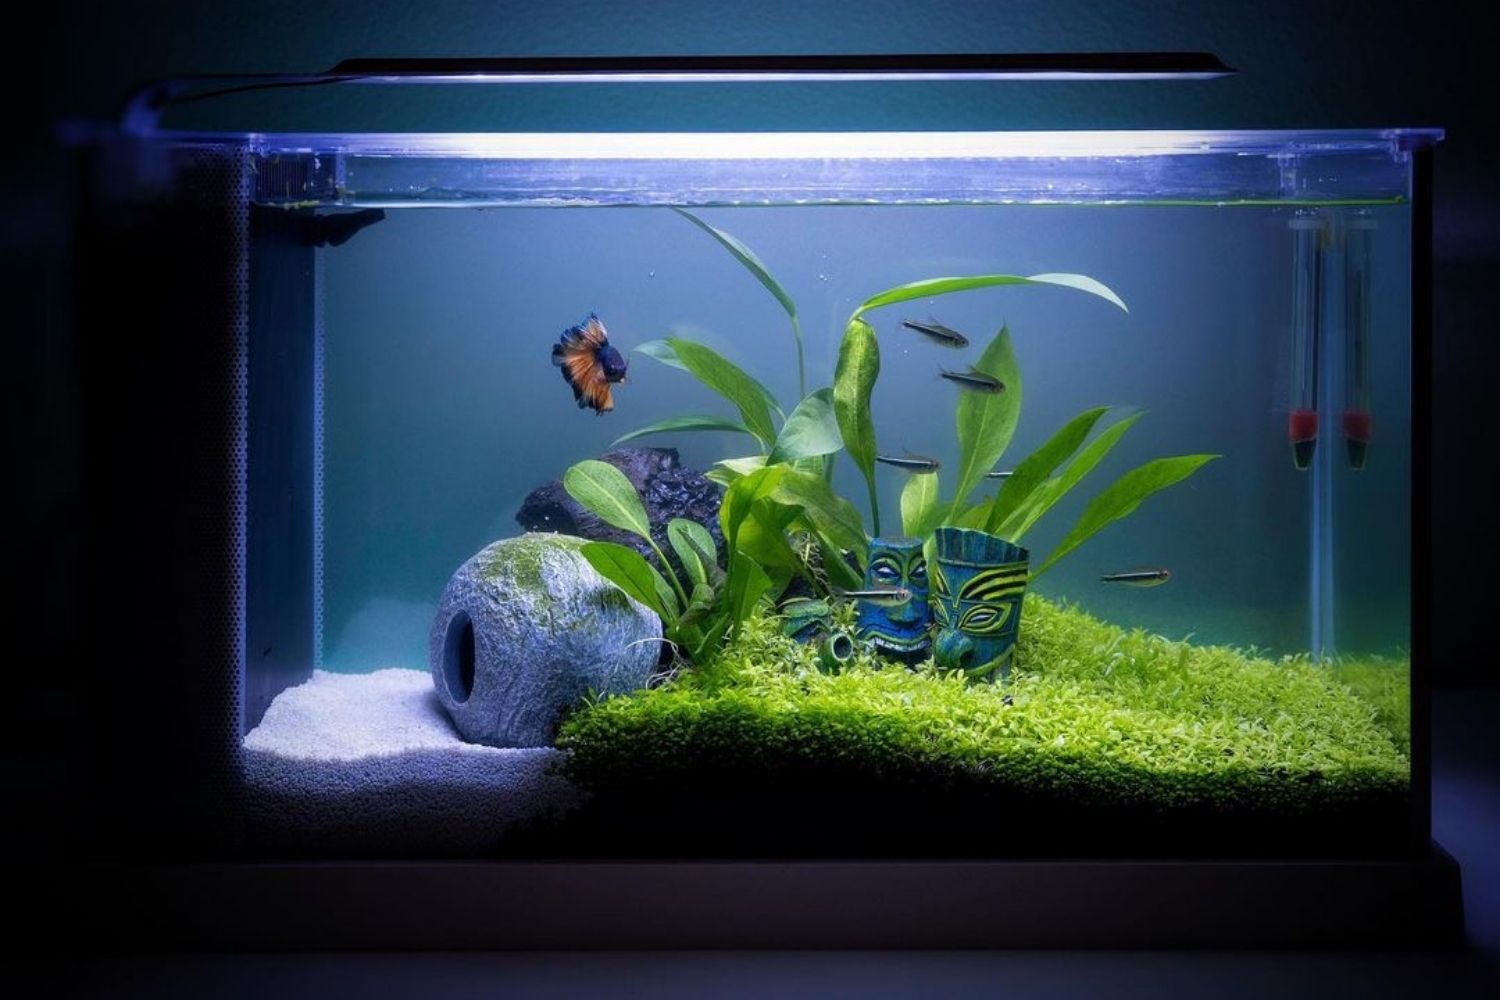 Fluval Spec V Review 5 Gallon Fish Tank with Fish inside